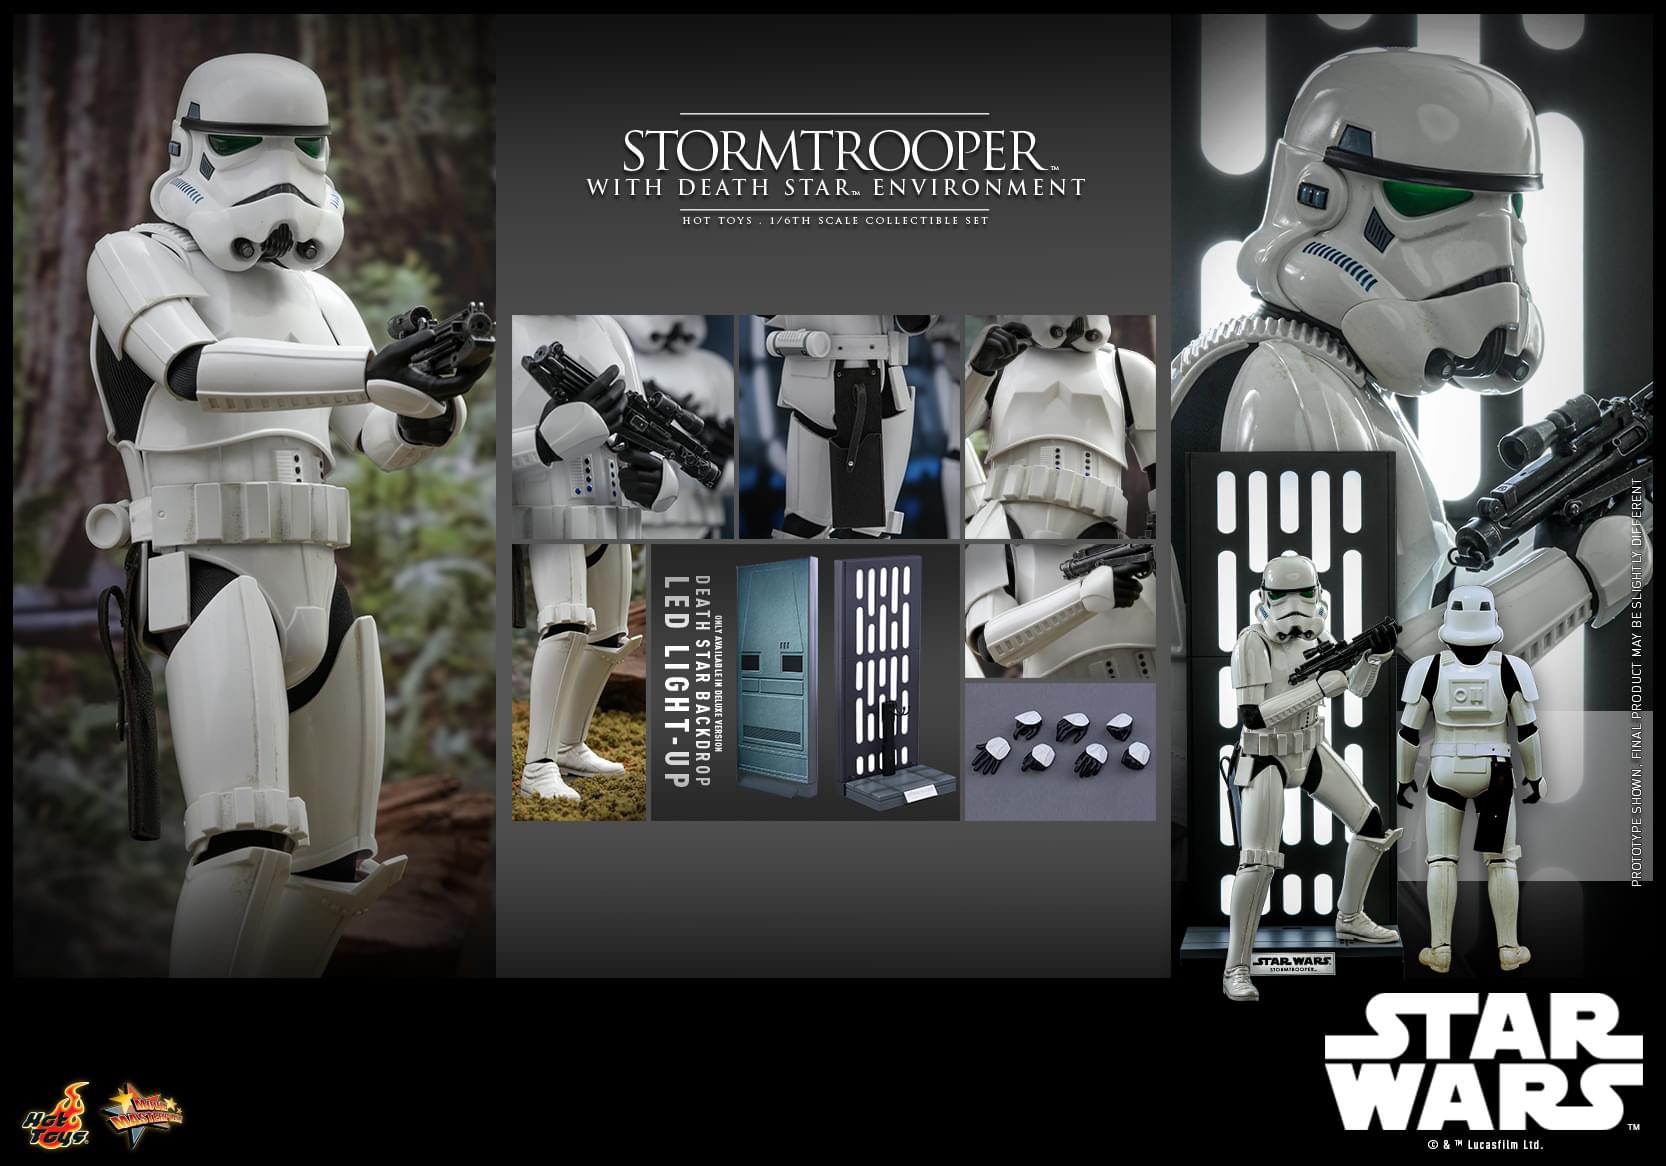 HOT TOYS MMS736 STAR WARS™
STORMTROOPER™ WITH DEATH STAR™
1/6TH SCALE COLLECTIBLE FIGURE